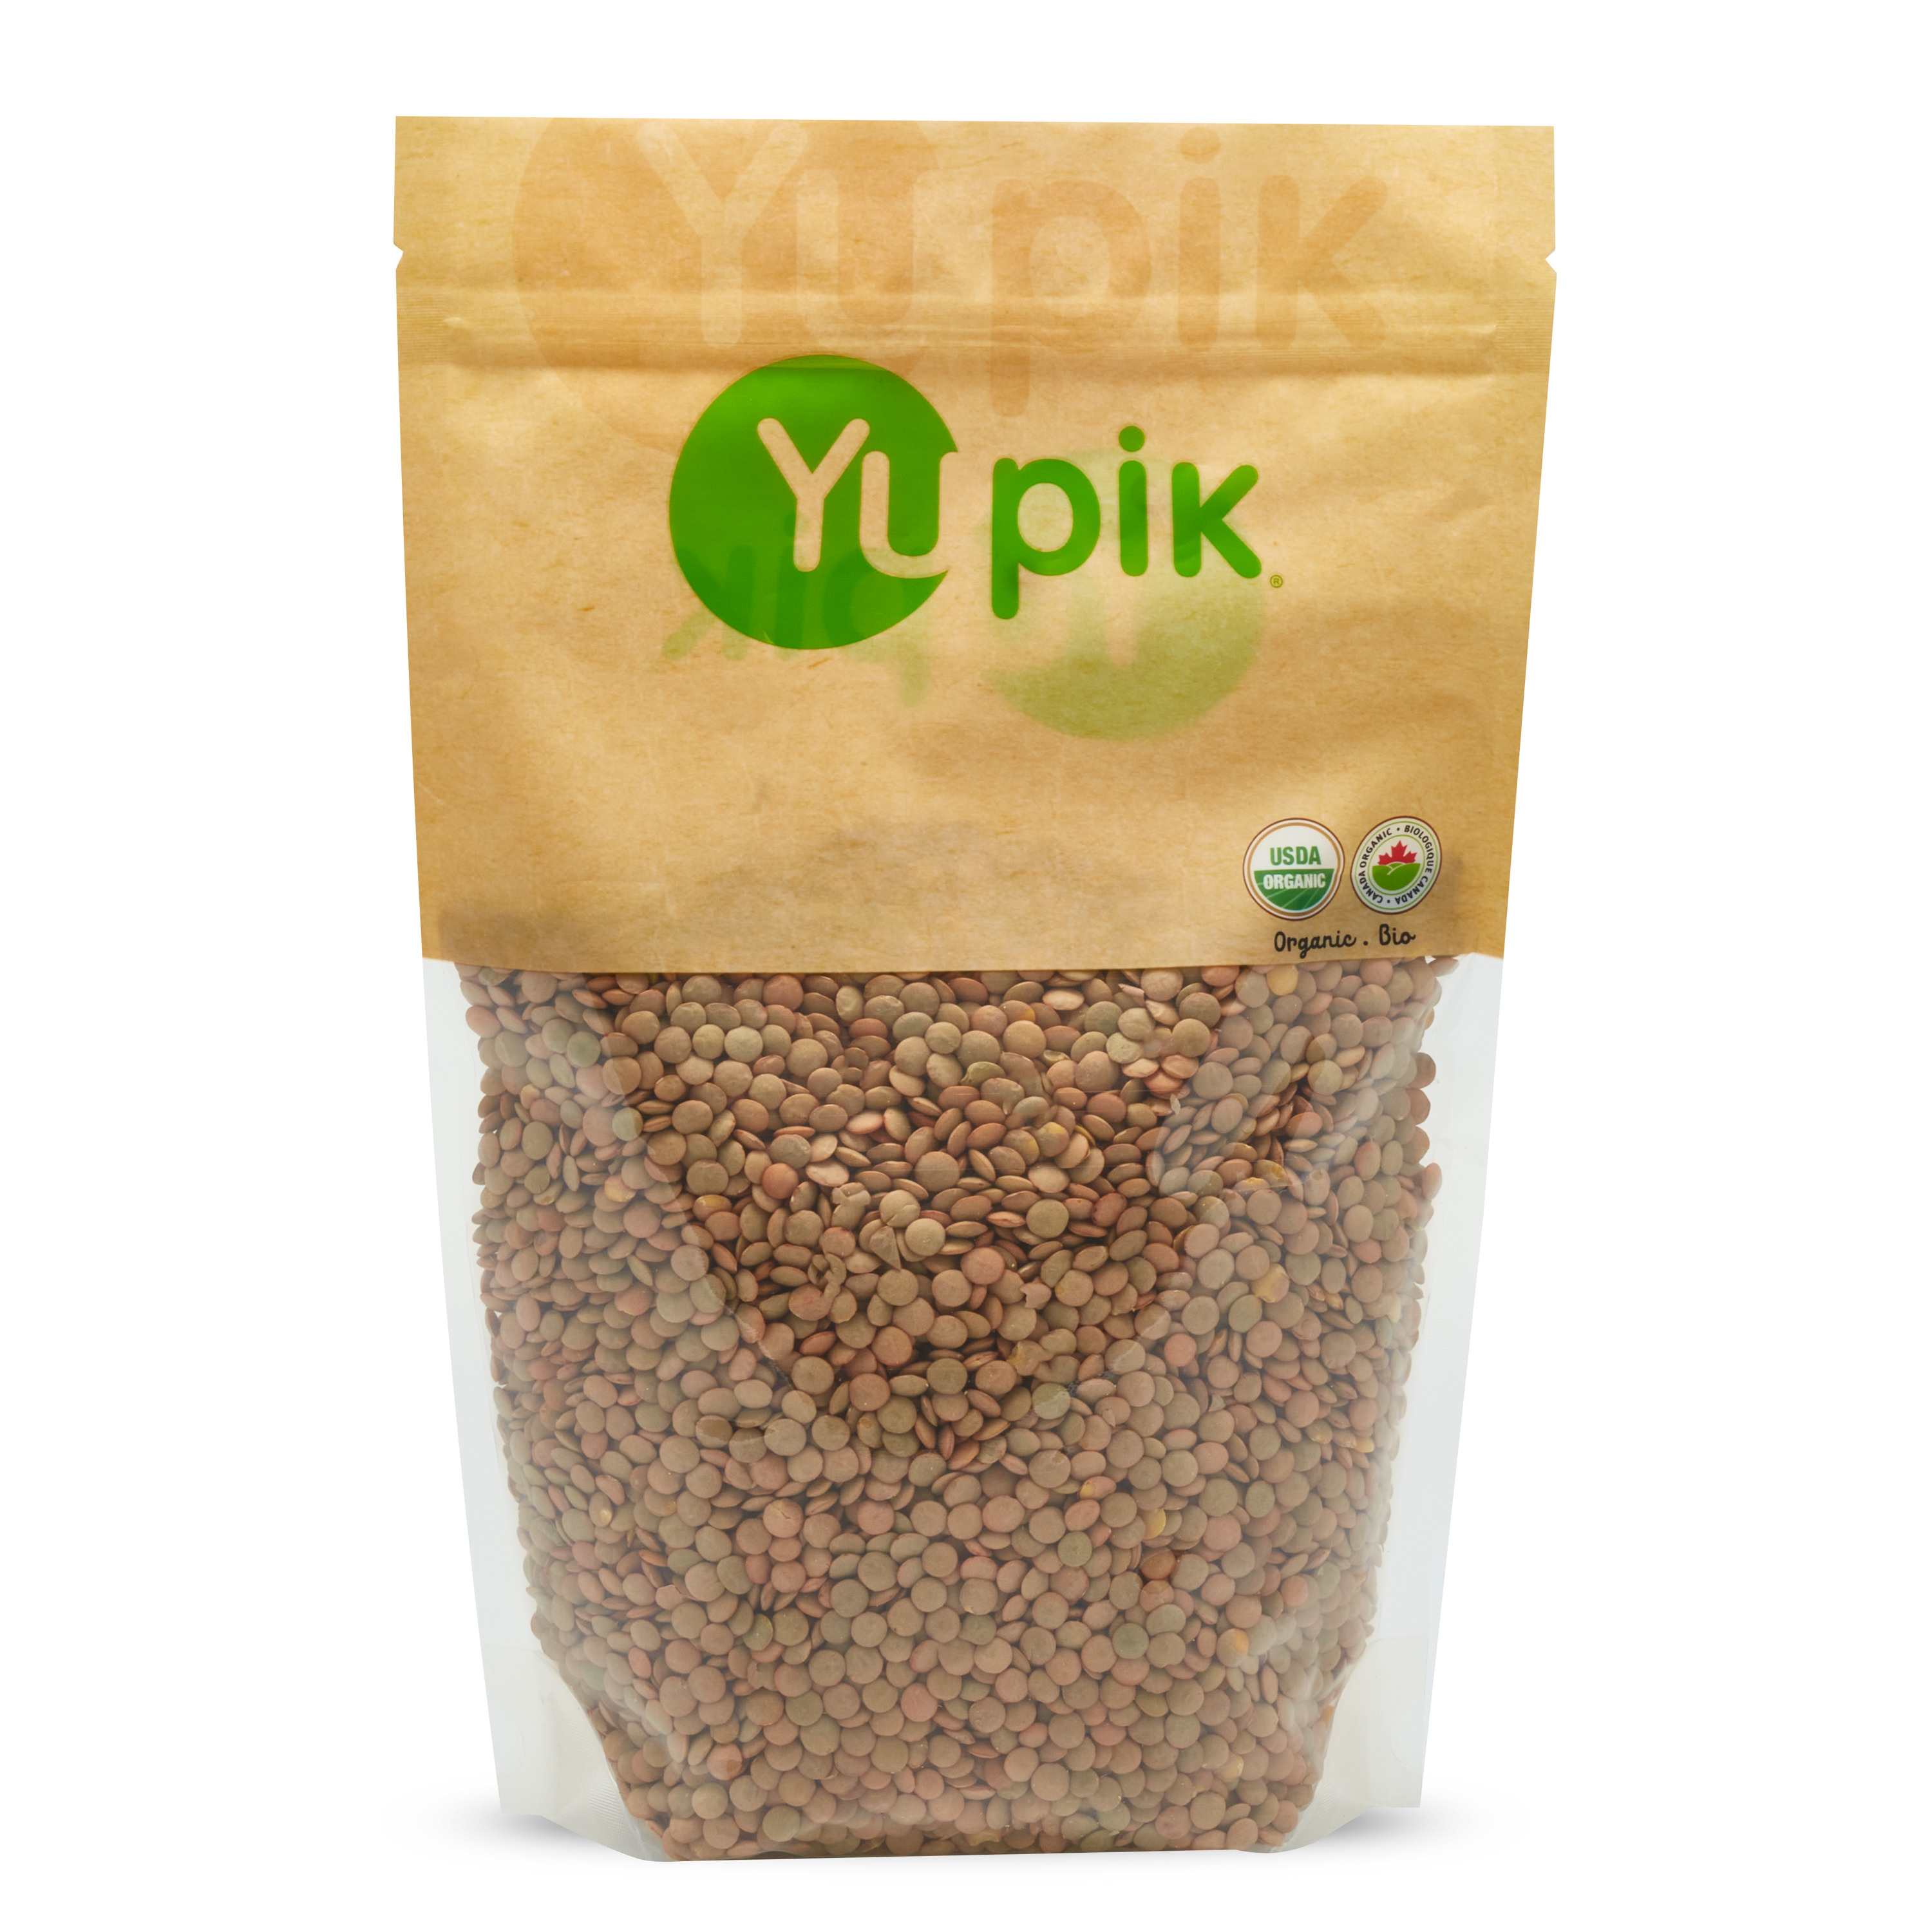 Organic green lentils.It is a raw agriculture product. Although it has been mechanically cleaned before packaging, some foreign material may be present. Sort and wash before using.